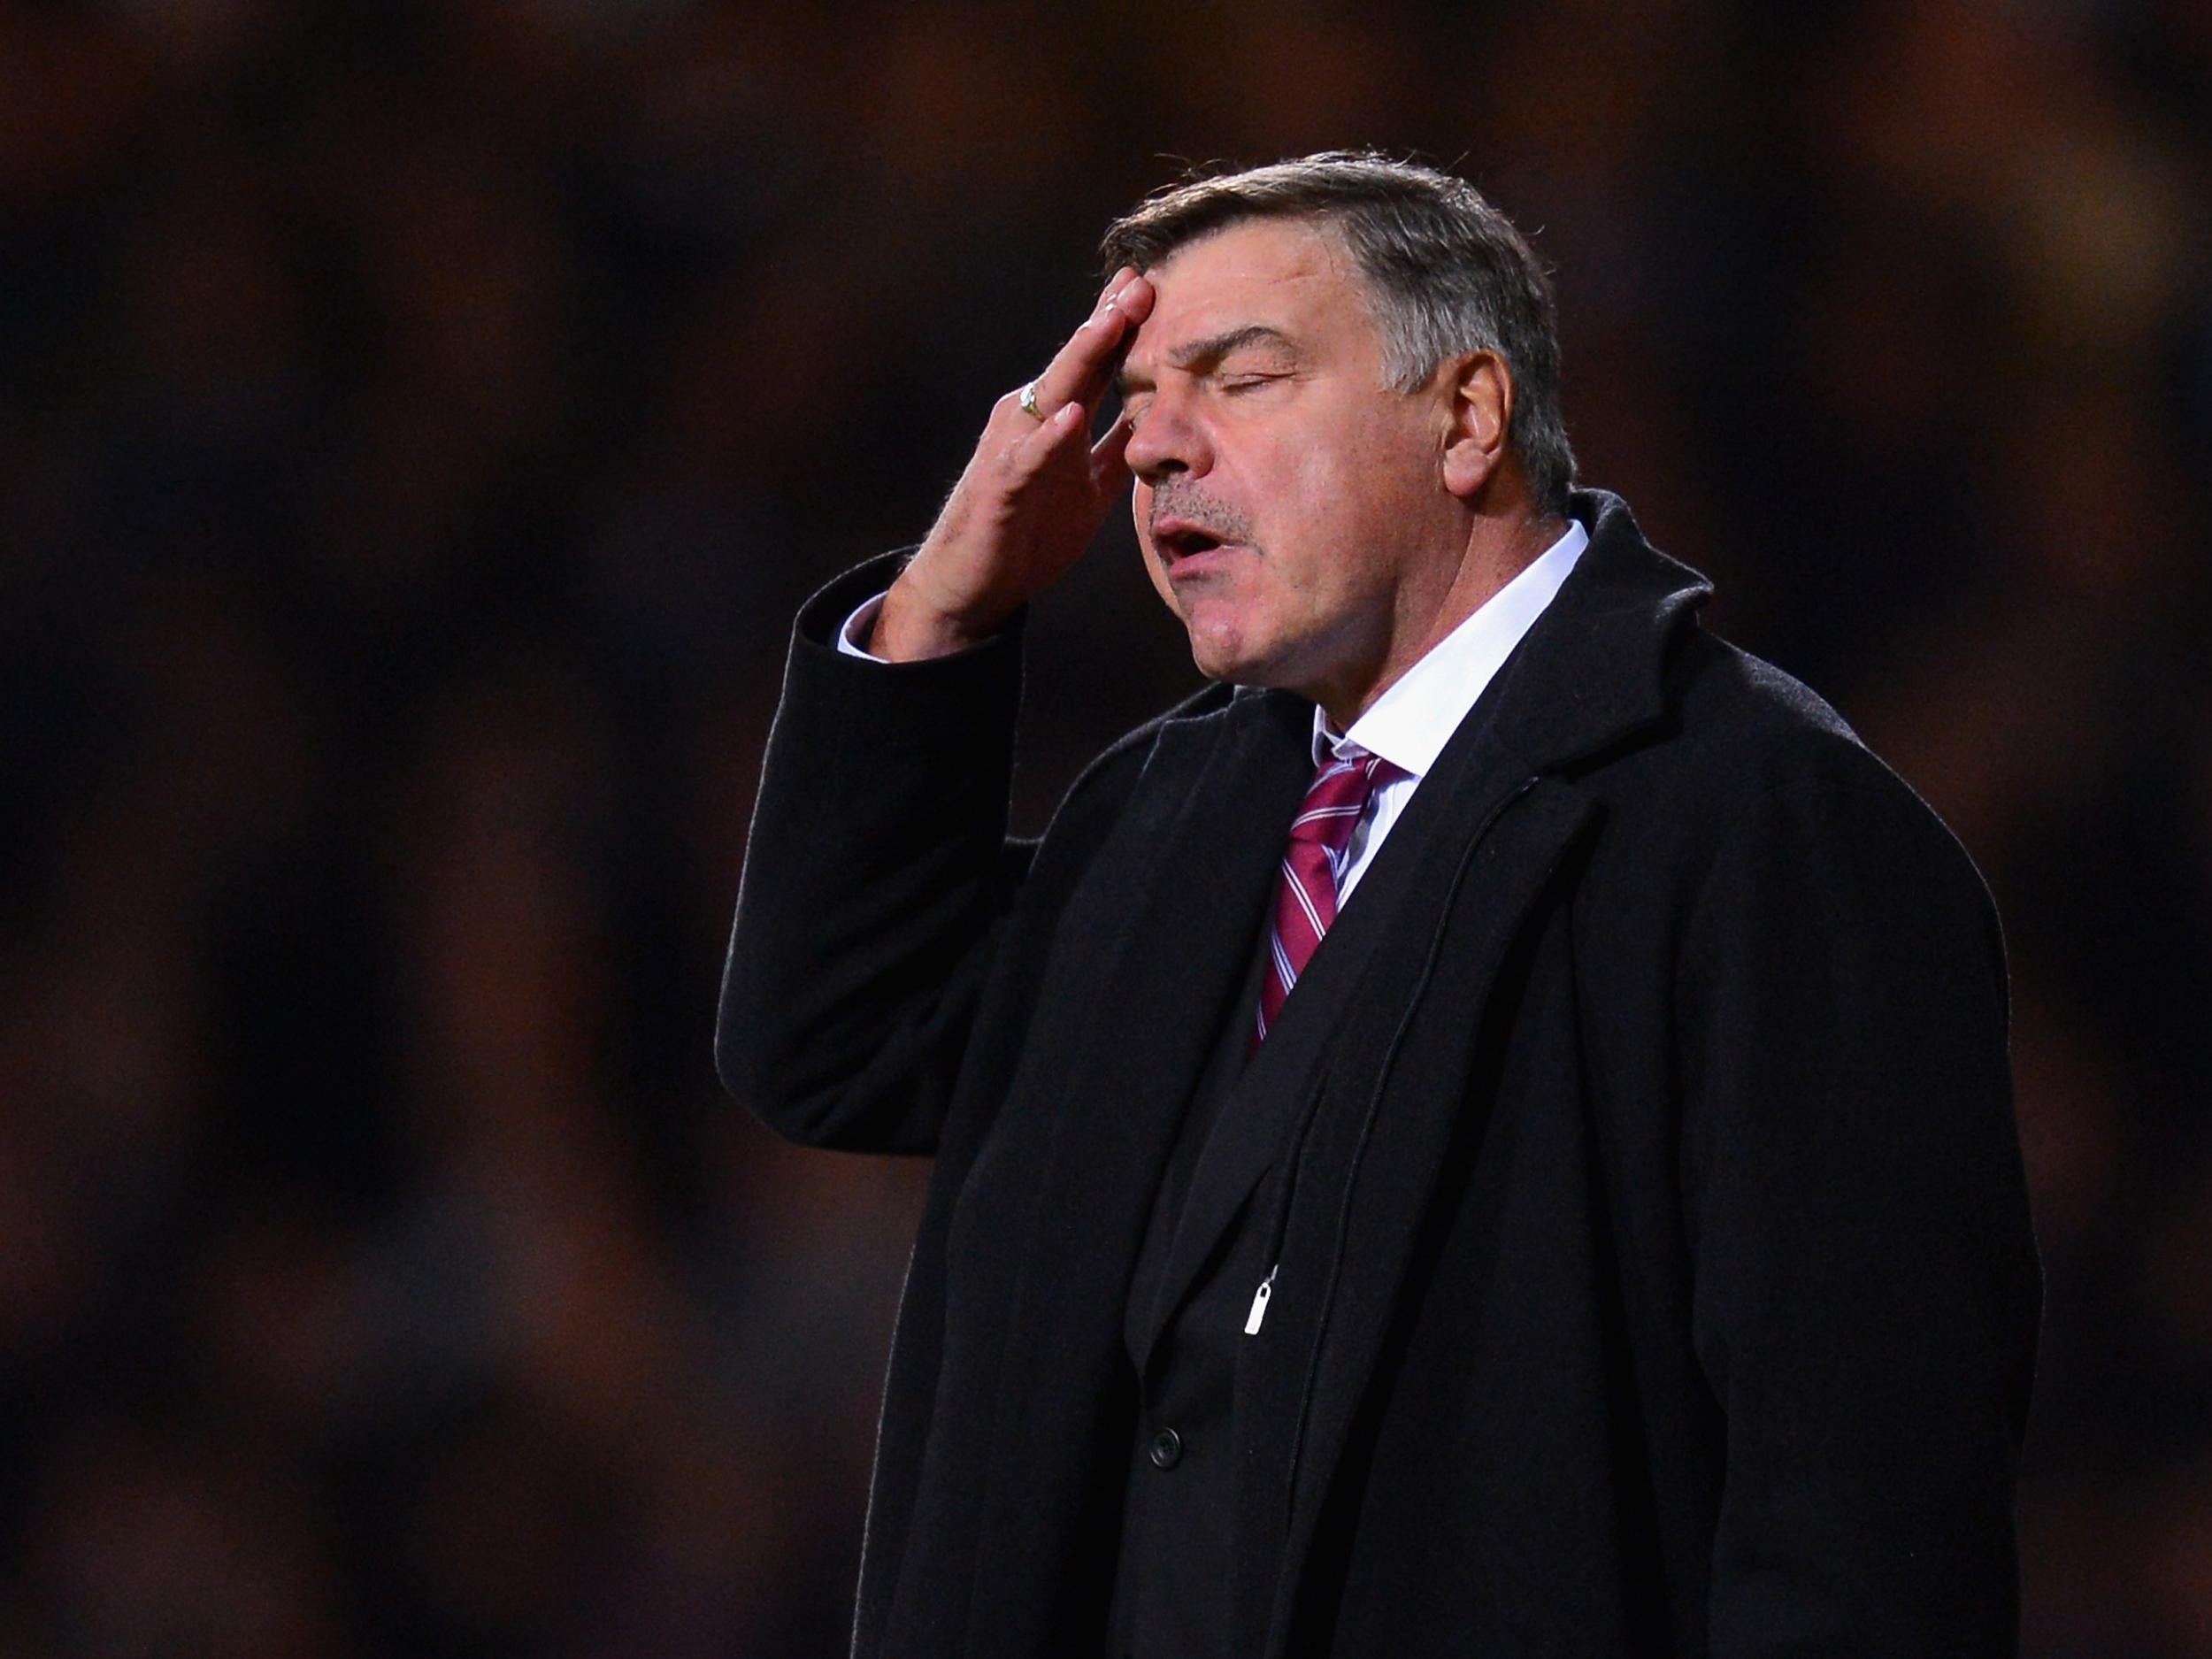 Remarks about the FA's rules on third party ownership cost Allardyce his job